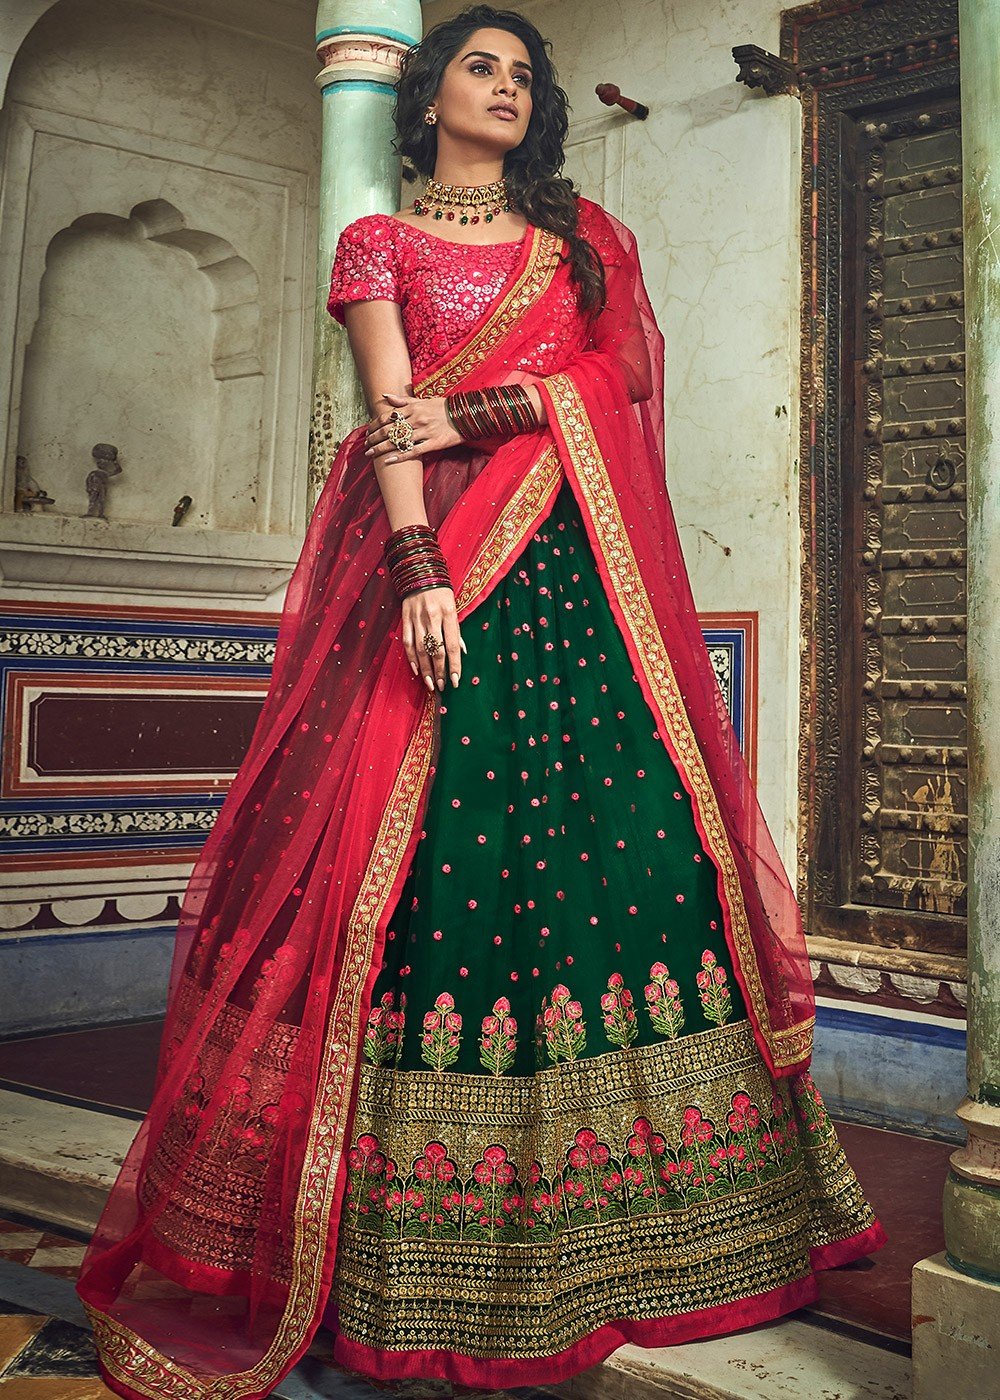 A Line Silk Exclusive Red Green Designer Bridal Lehenga Choli With Red Dupatta Size Free Size